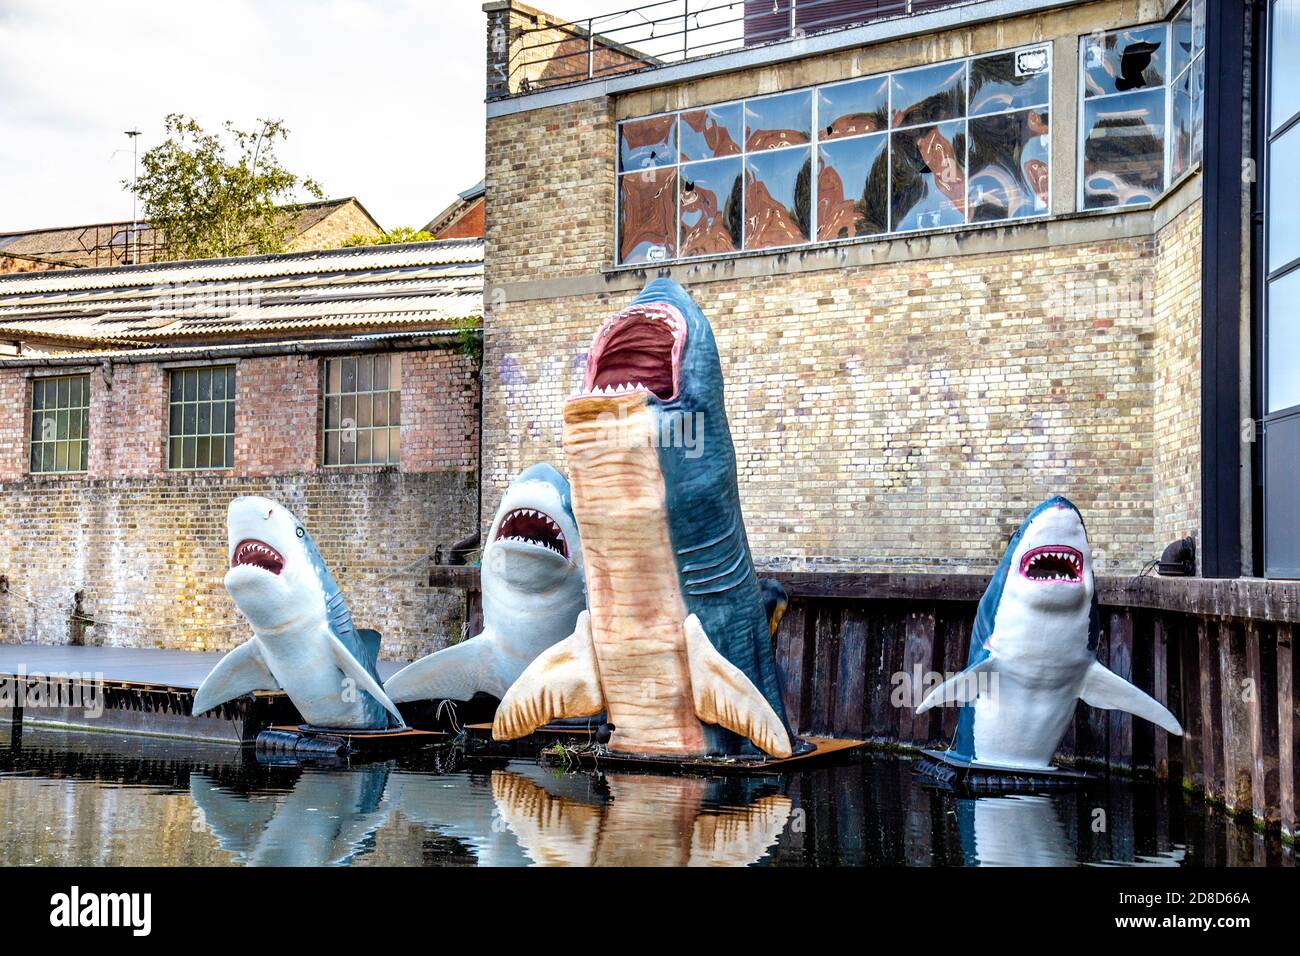 Fiberglass sharks, winners of the Architecture Foundation prize on Regents Canal in Haggerston, London, UK Stock Photo